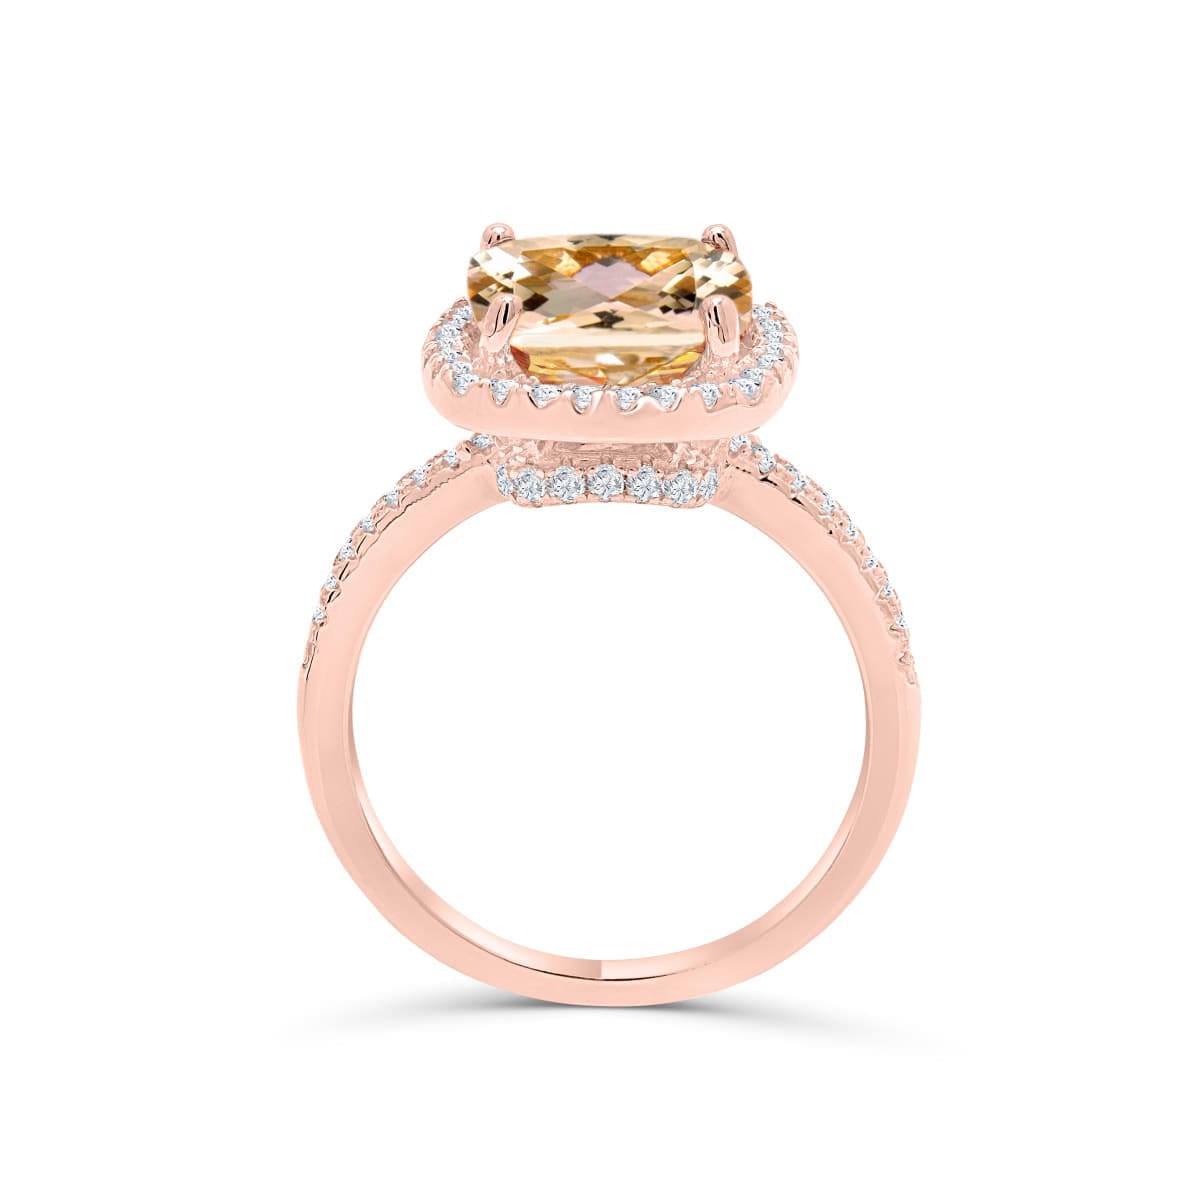 the lovely halo morganite stone ring setting